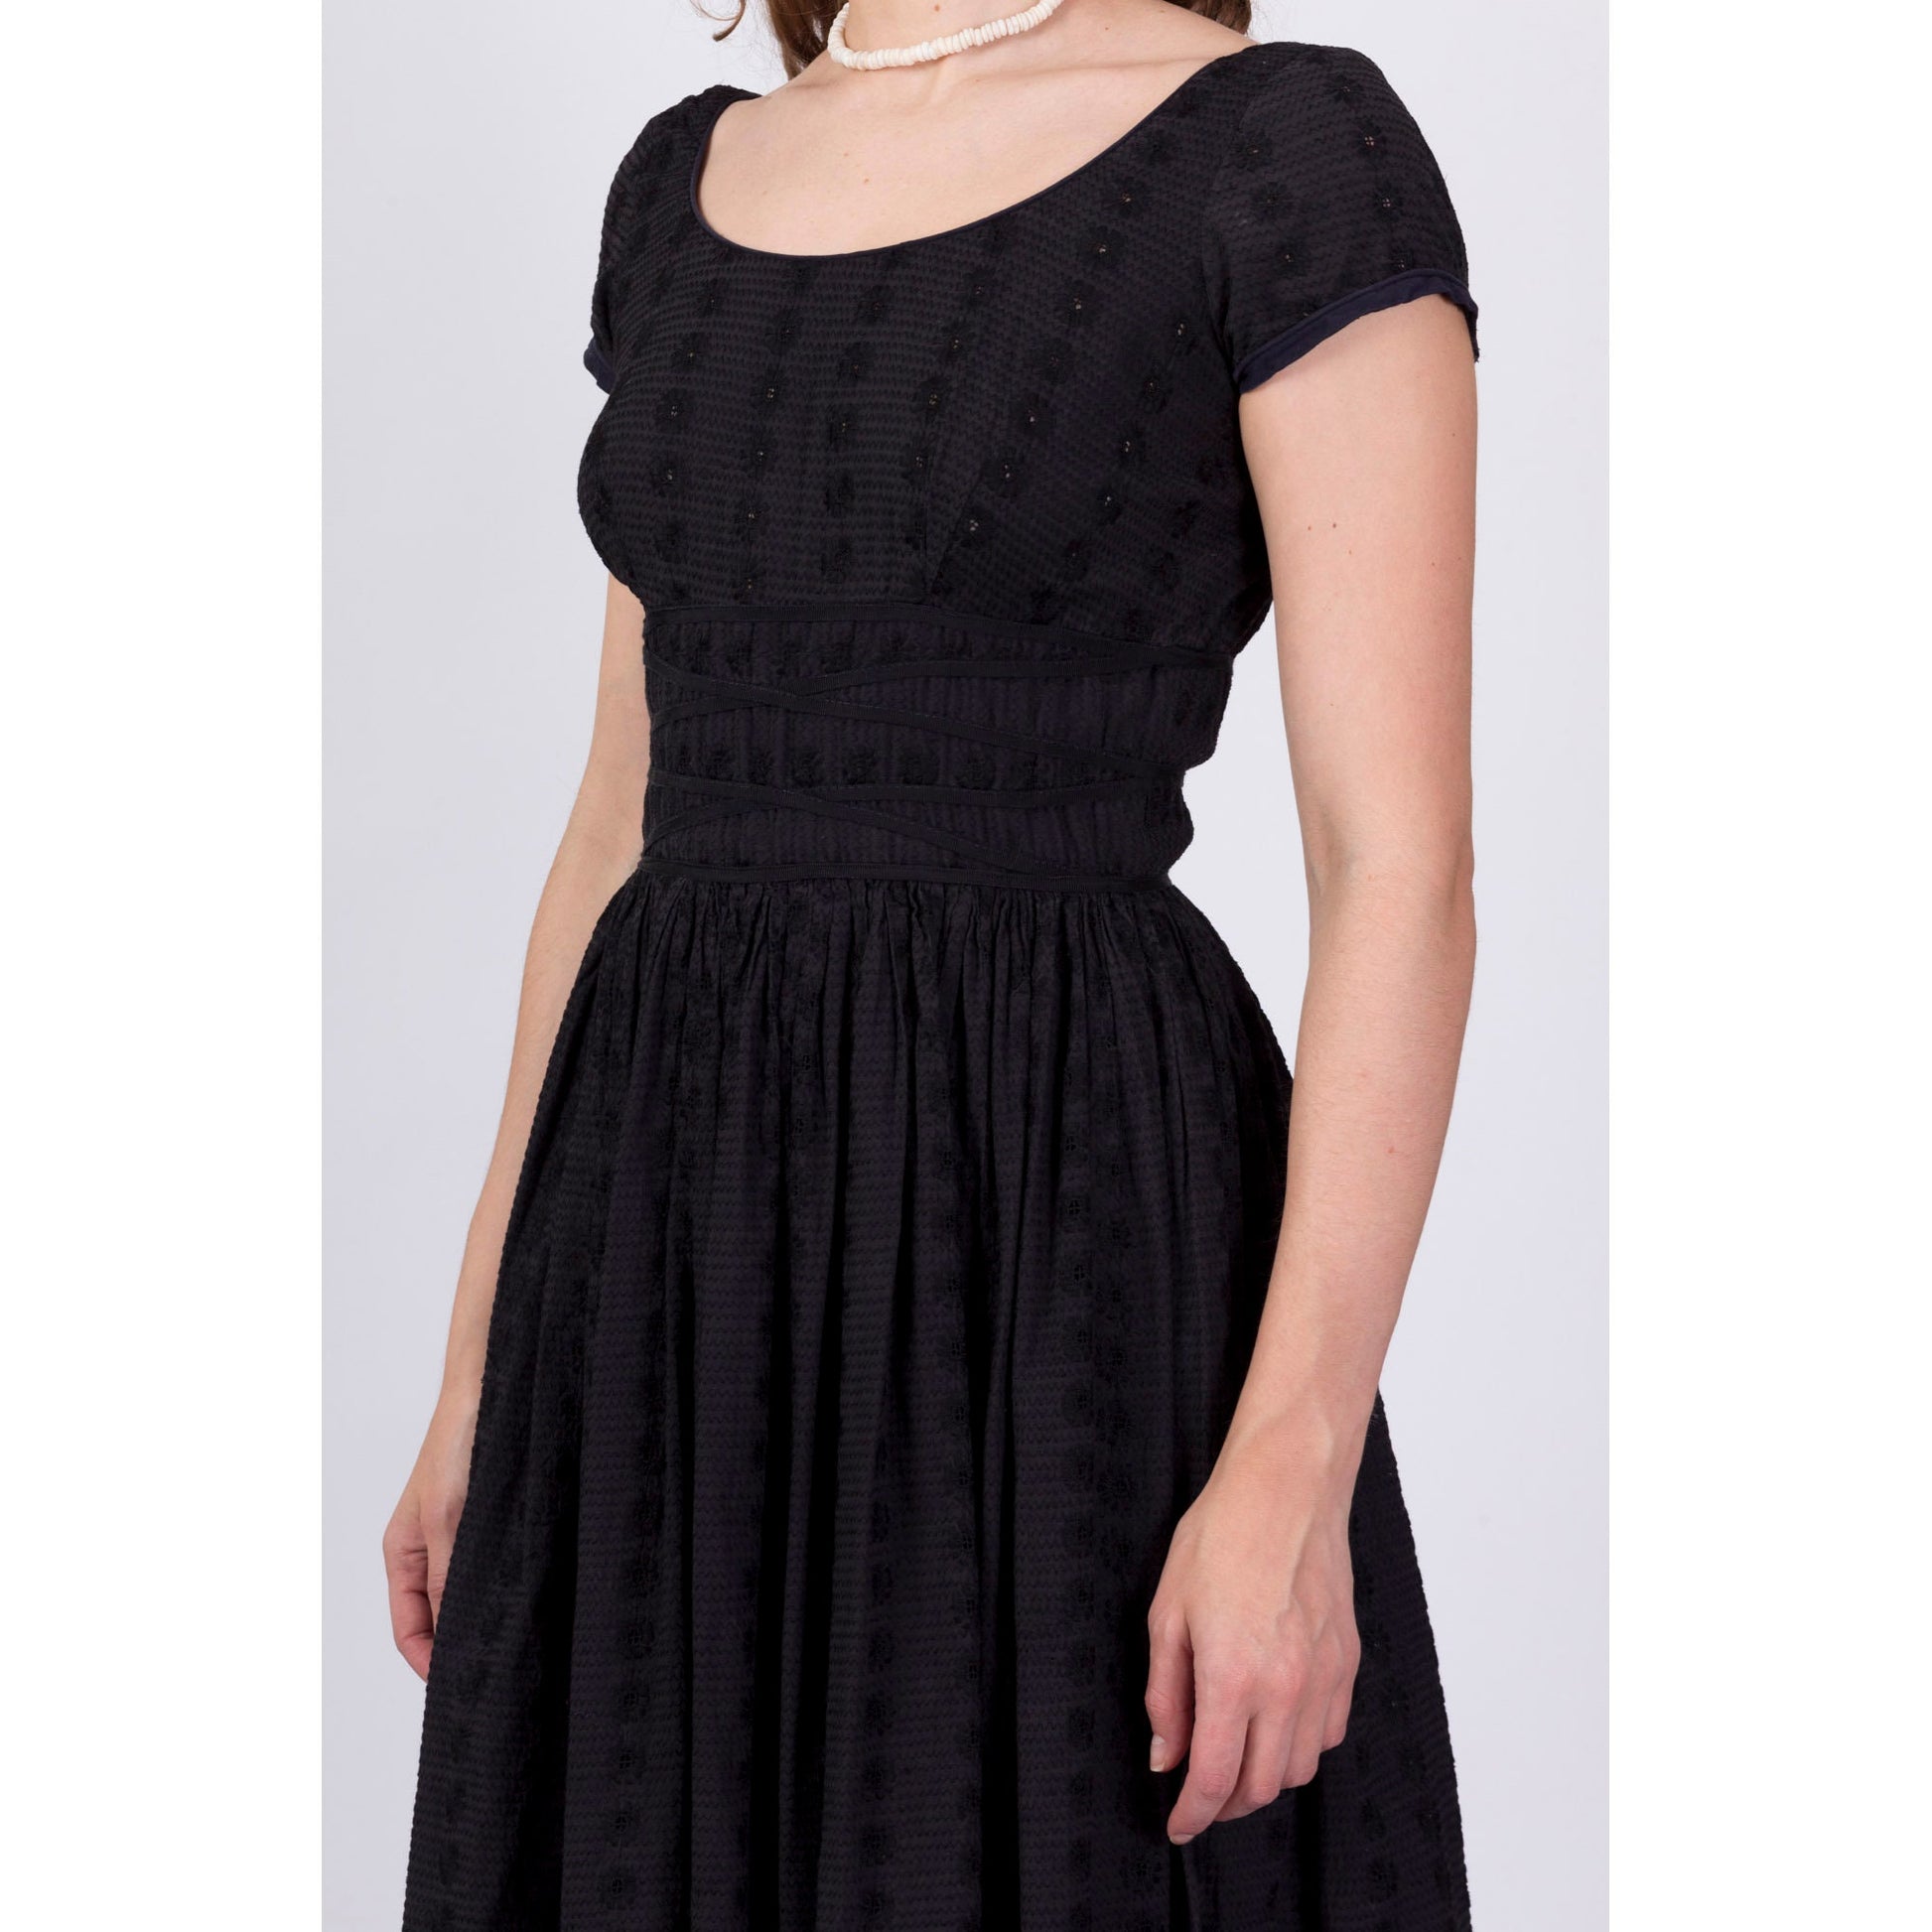 1950s Jerry Gilden Black Eyelet Fit & Flare Cocktail Dress - Extra Small 